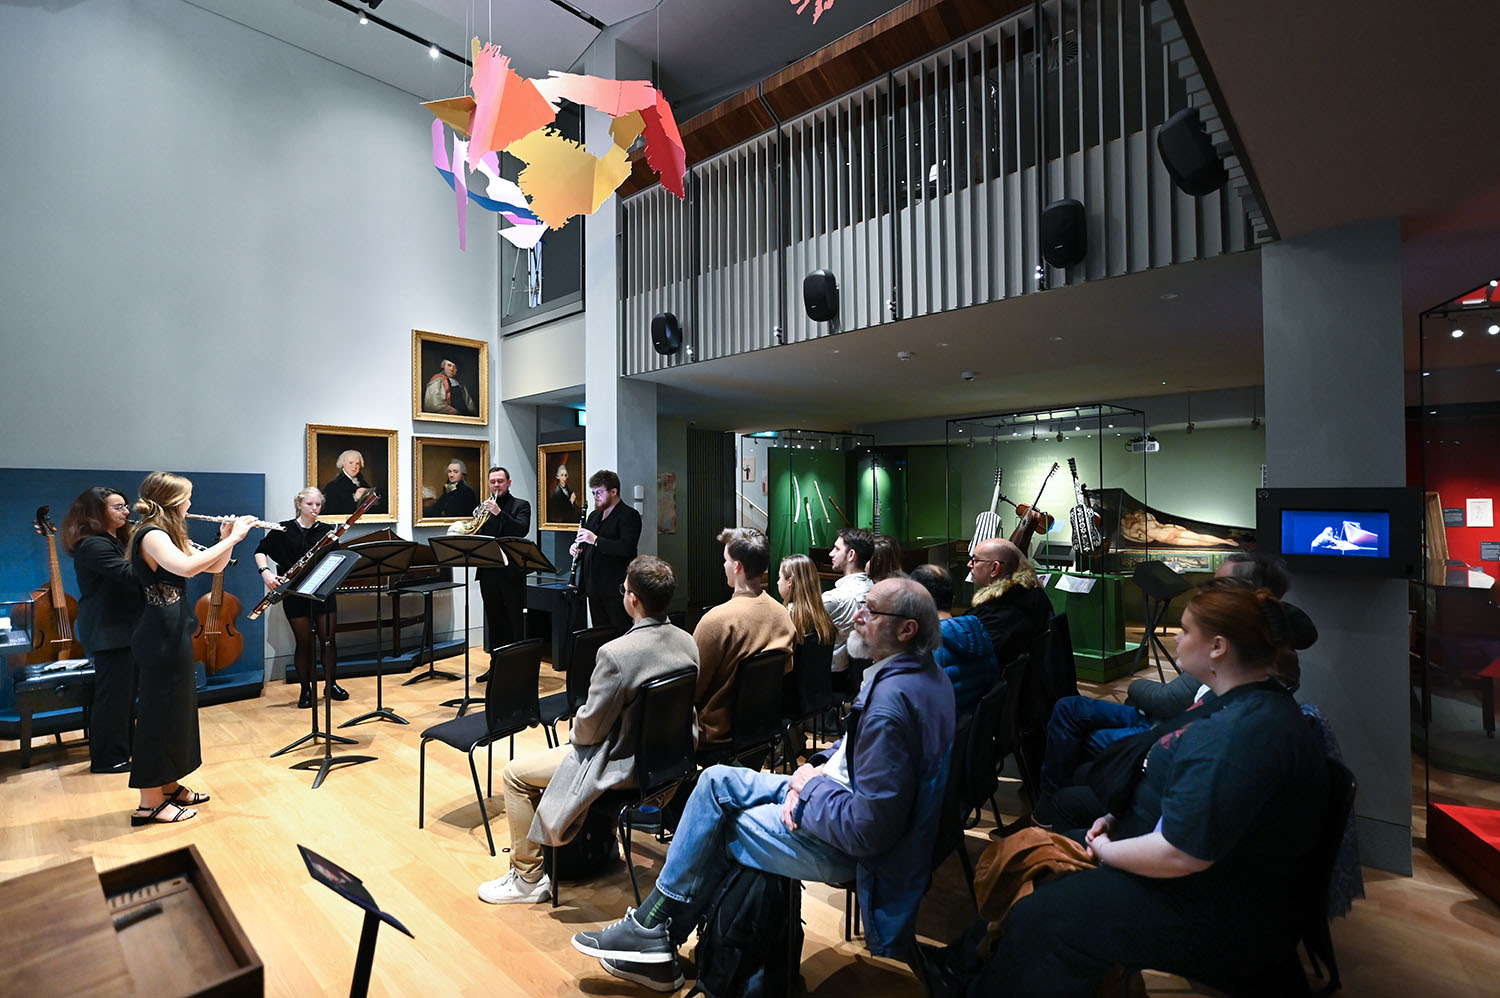 A group of chamber musicians performing to a full audience in the RCM Museum